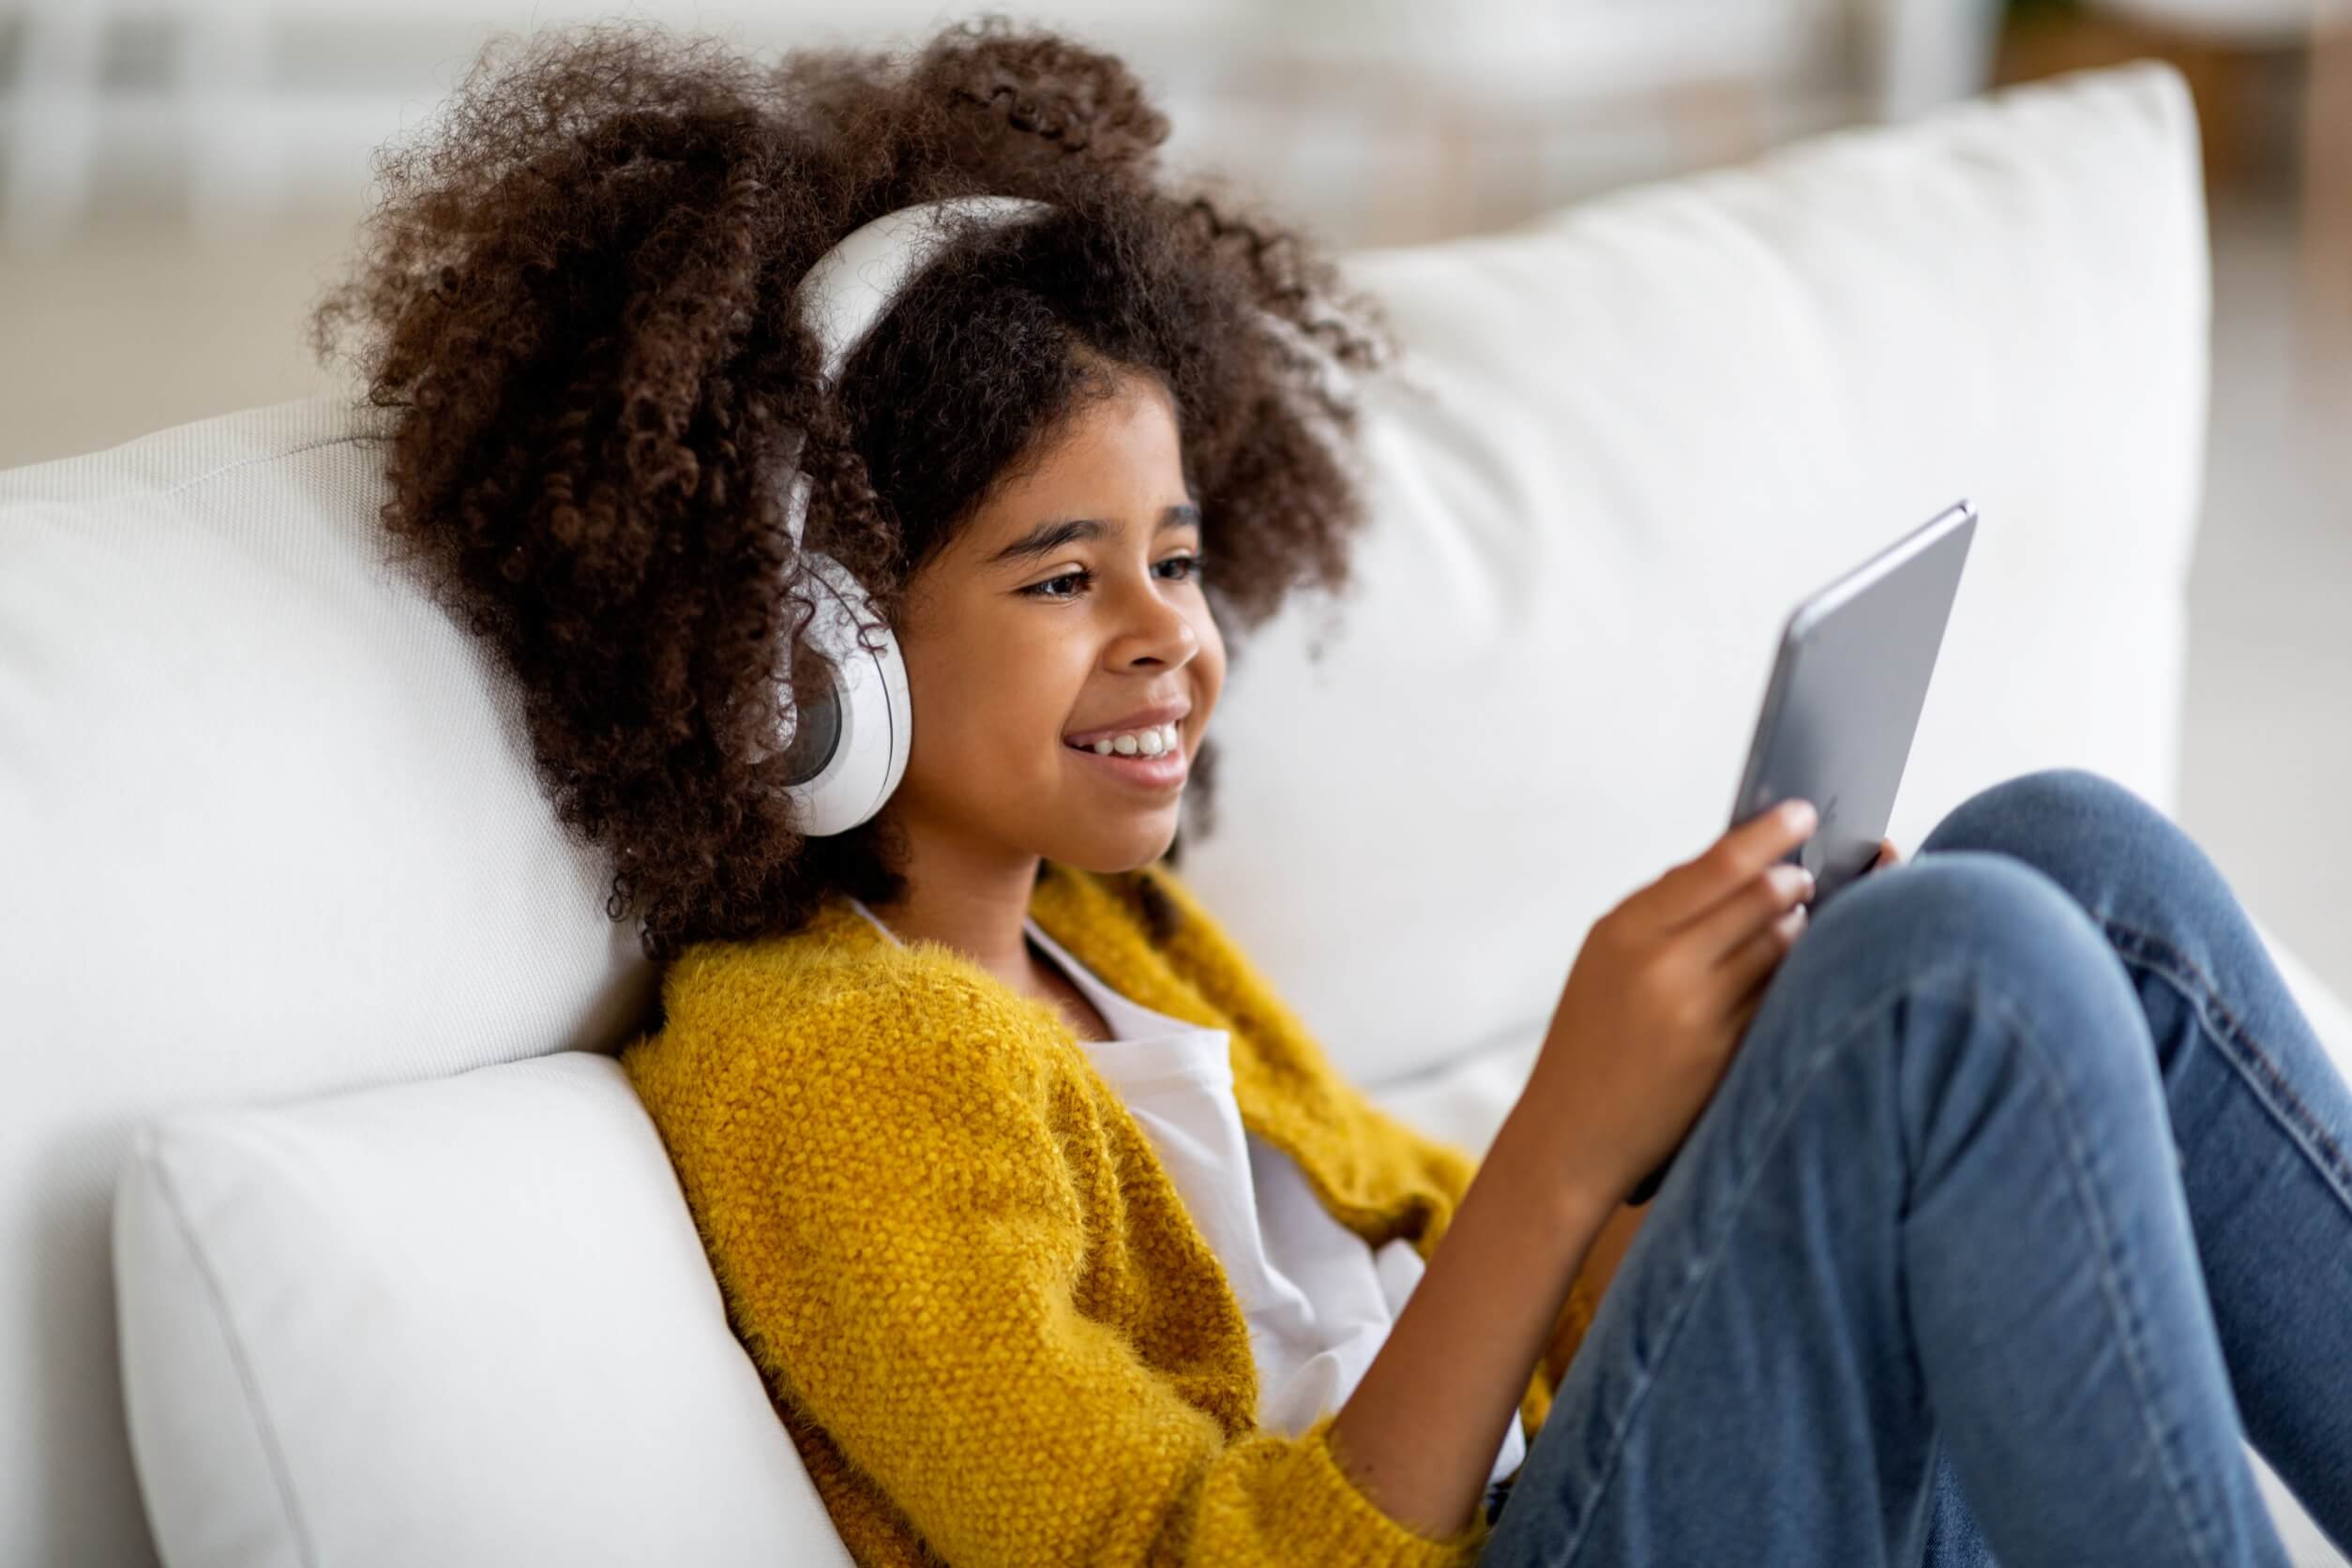 A little girl wearing headphones and watching a tablet, smiling.